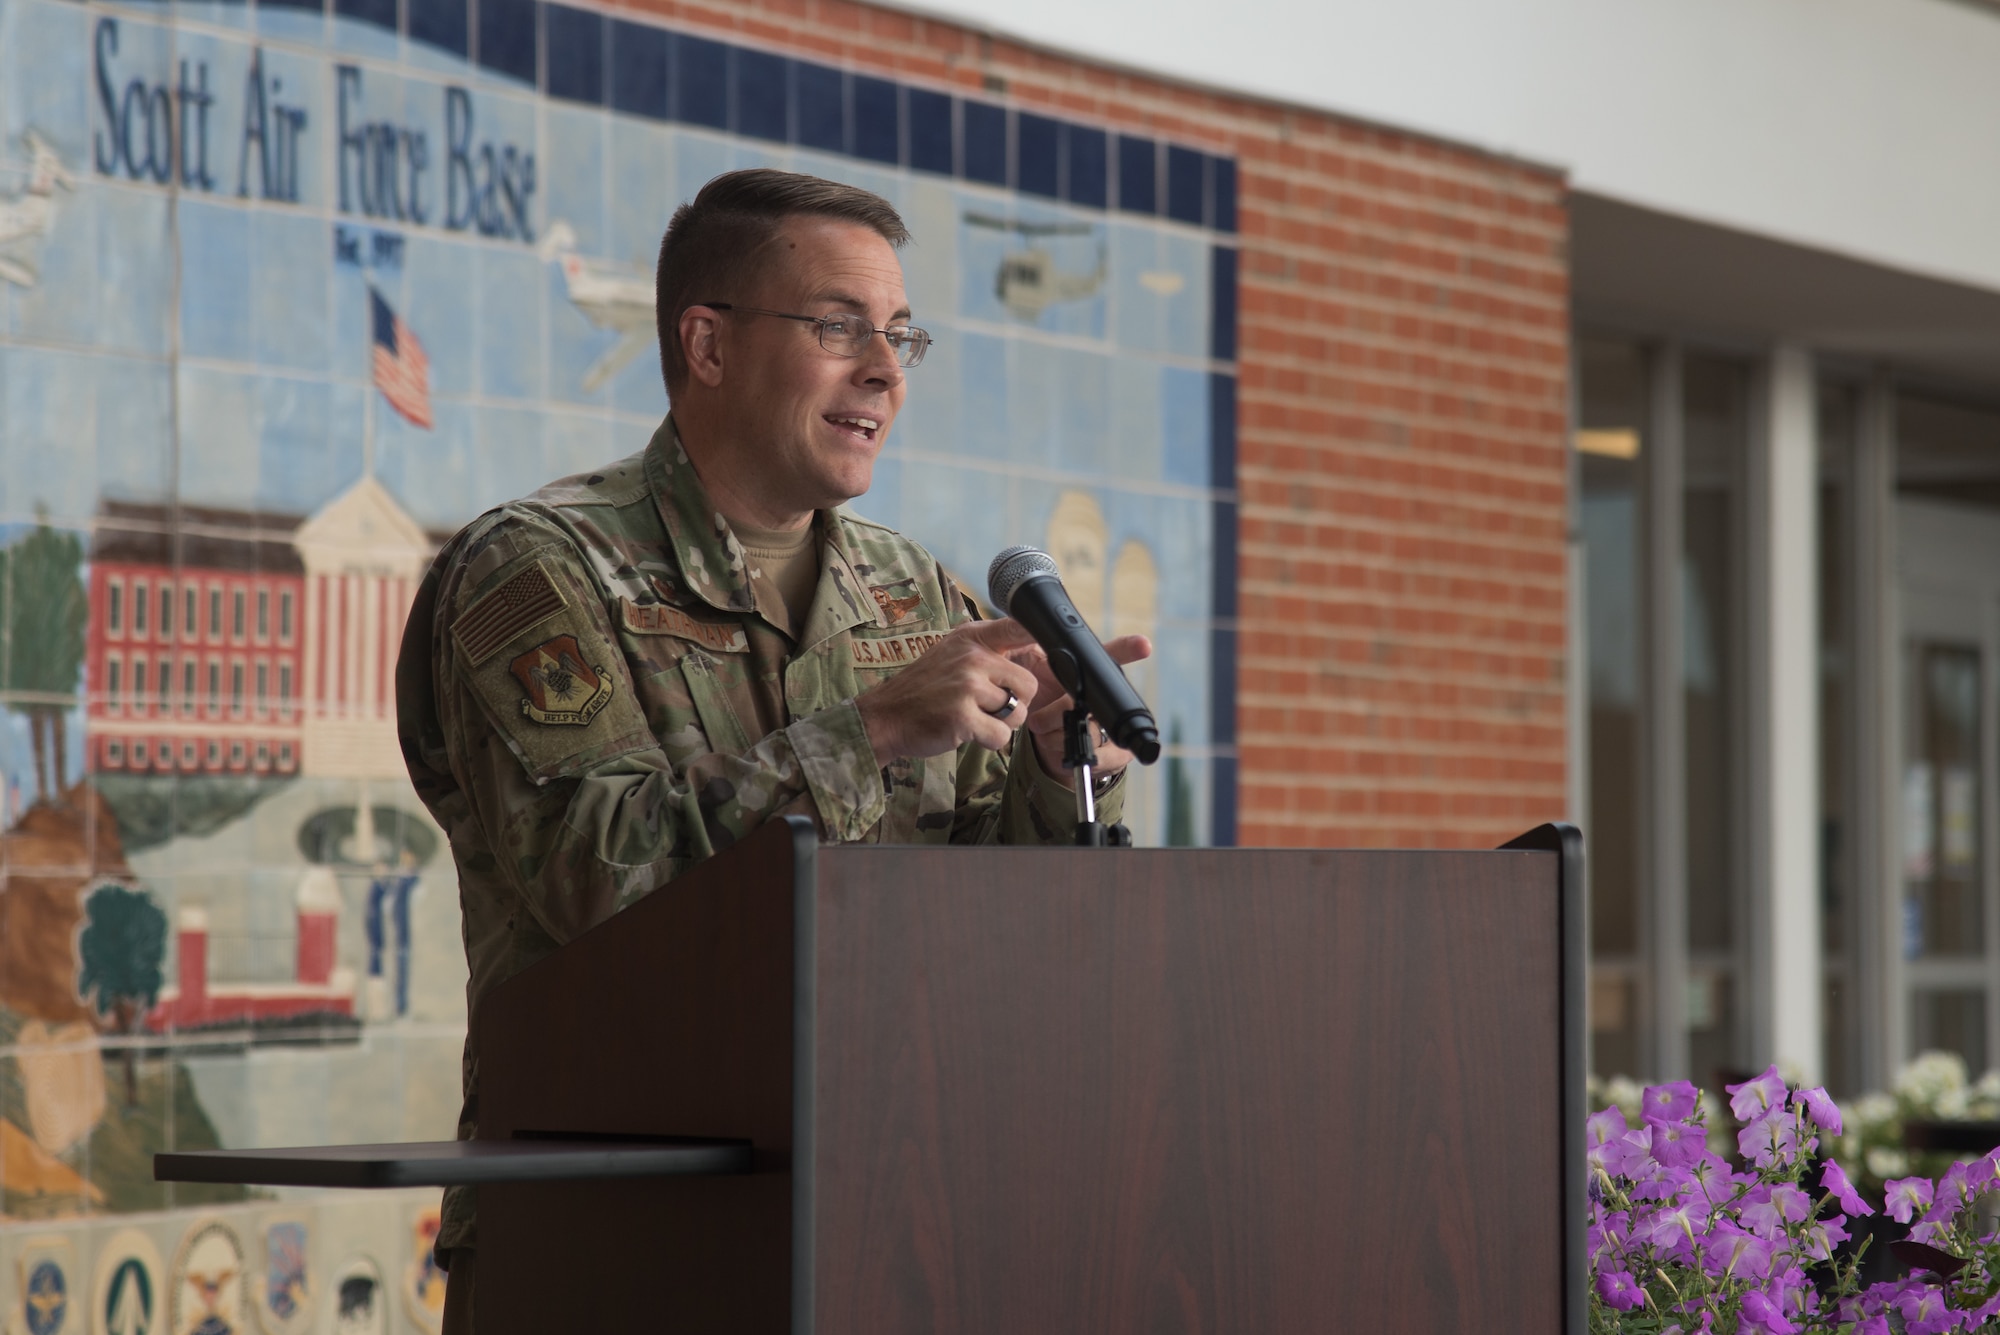 U.S. Air Force Col. J. Scot Heathman, 375th Air Mobility Wing commander, commemorates the opening of the Exceptional Family Member Program One Stop on Scott Air Force Base, Illinois, June 24, 2021. The One Stop program relocated the three components of EFMP into one building to maximize communication between families and the EFMP. (U.S. Air Force photo by Airman 1st Class Mark Sulaica)